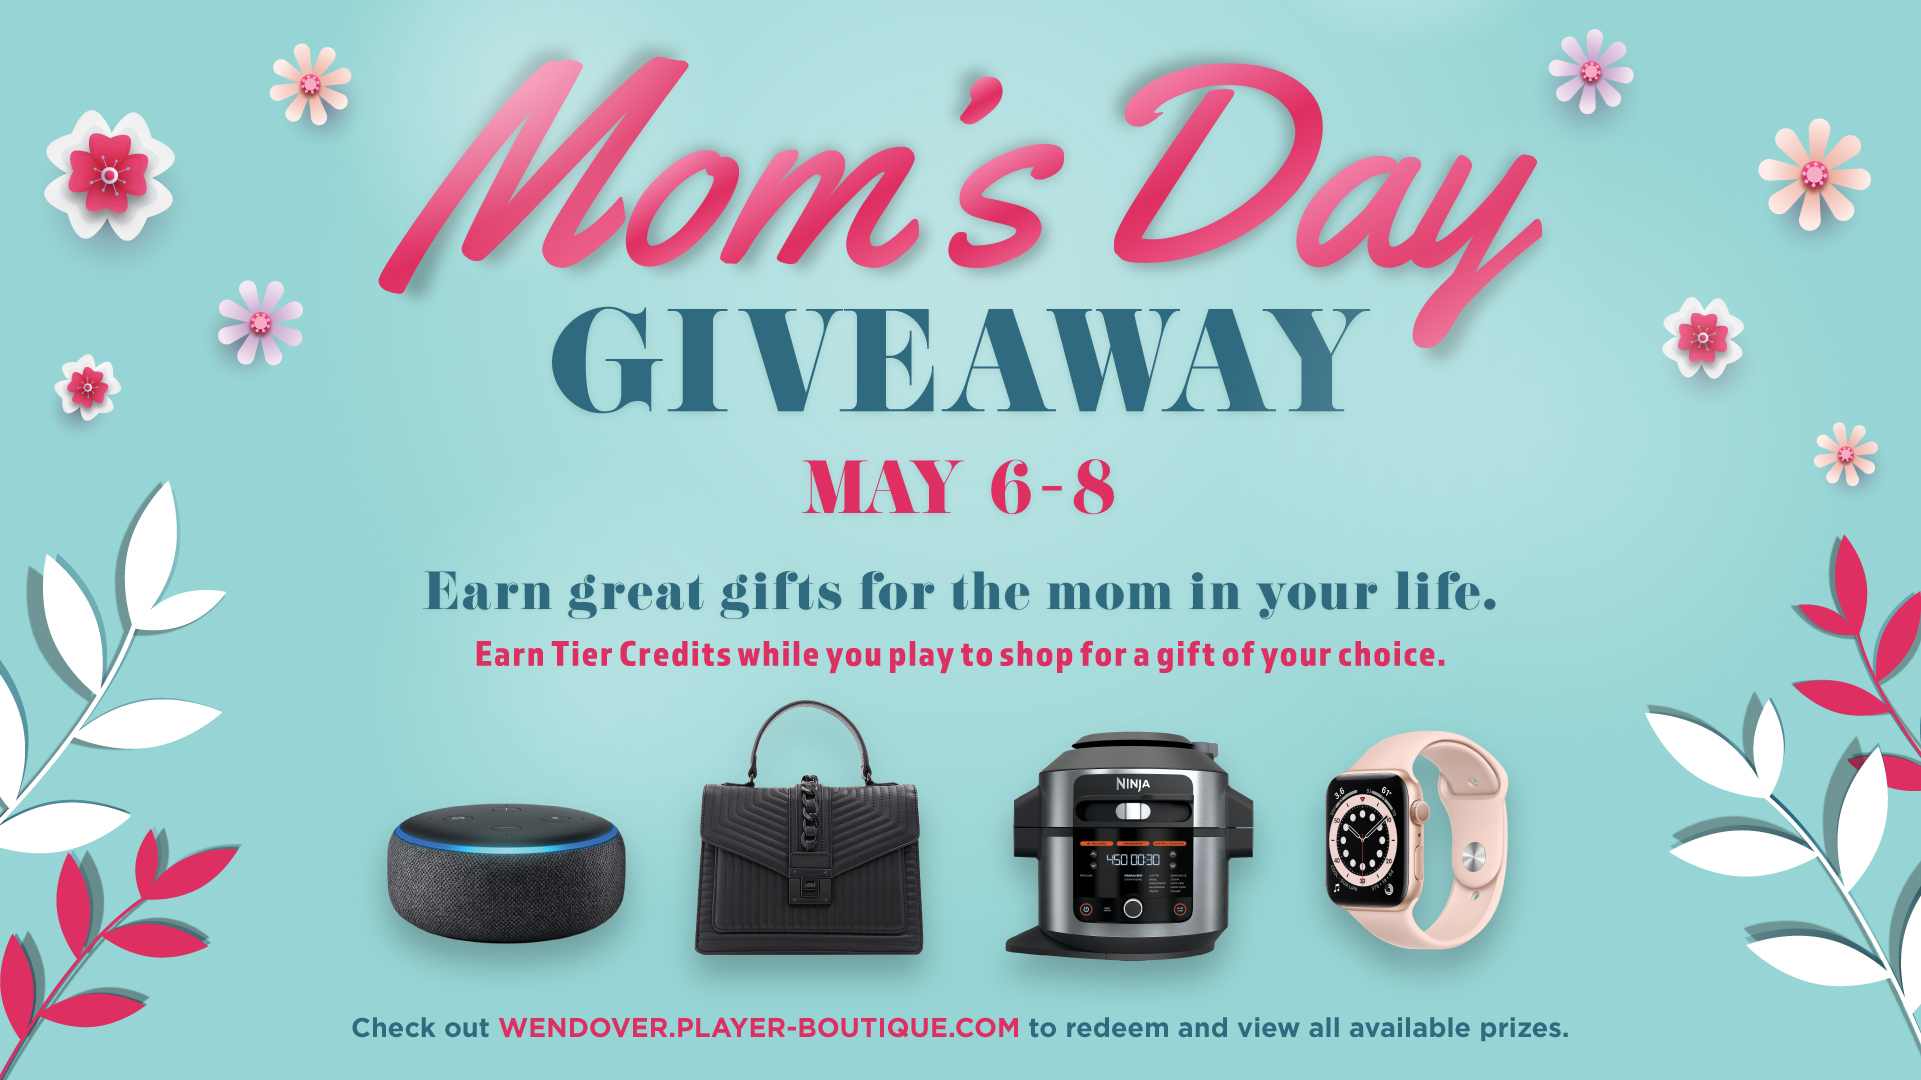 Mom's Day Giveaway May 6-8 Earn great gifts for the mom in your life. Earn tier credits while you play to shop for a gift of your choice.